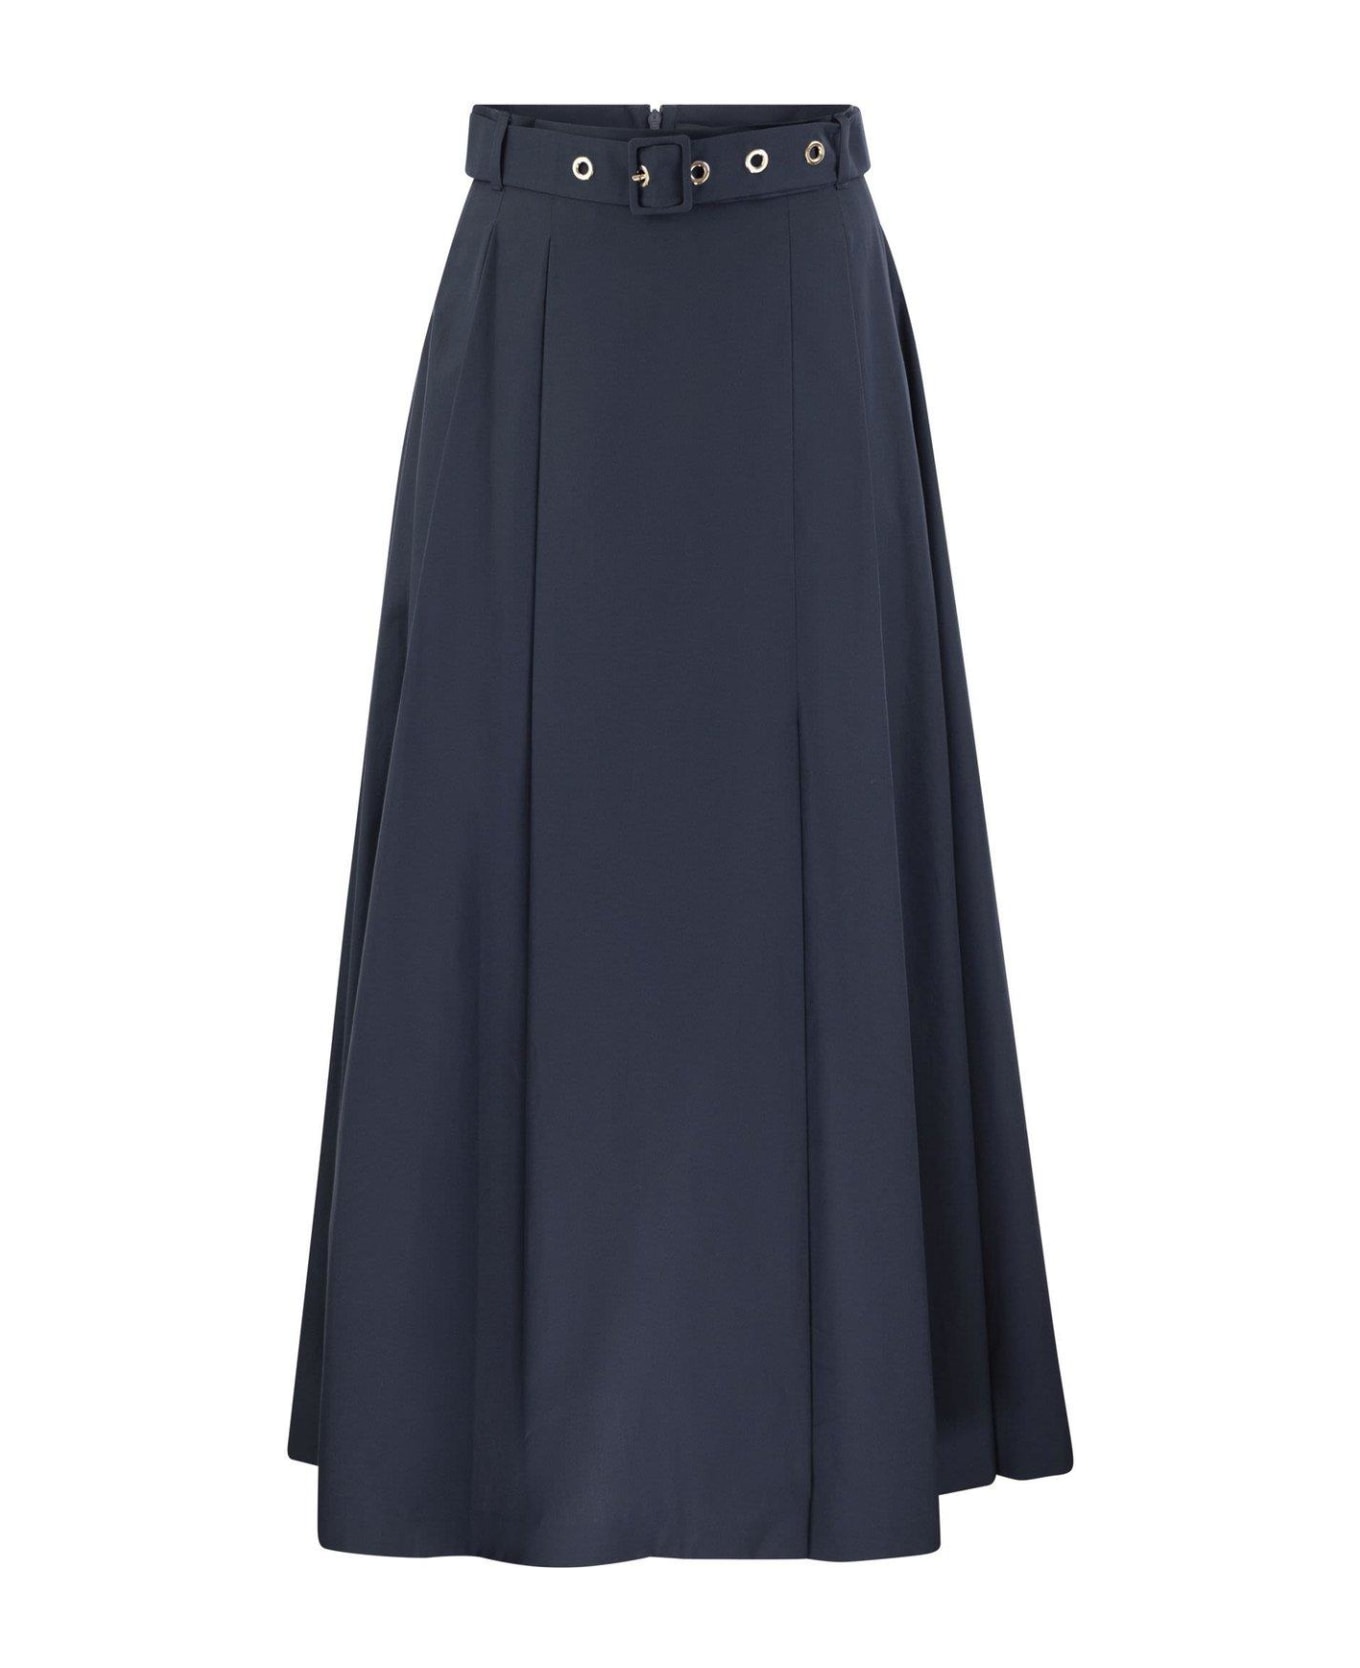 'S Max Mara Belted Pleated Skirt - Blue